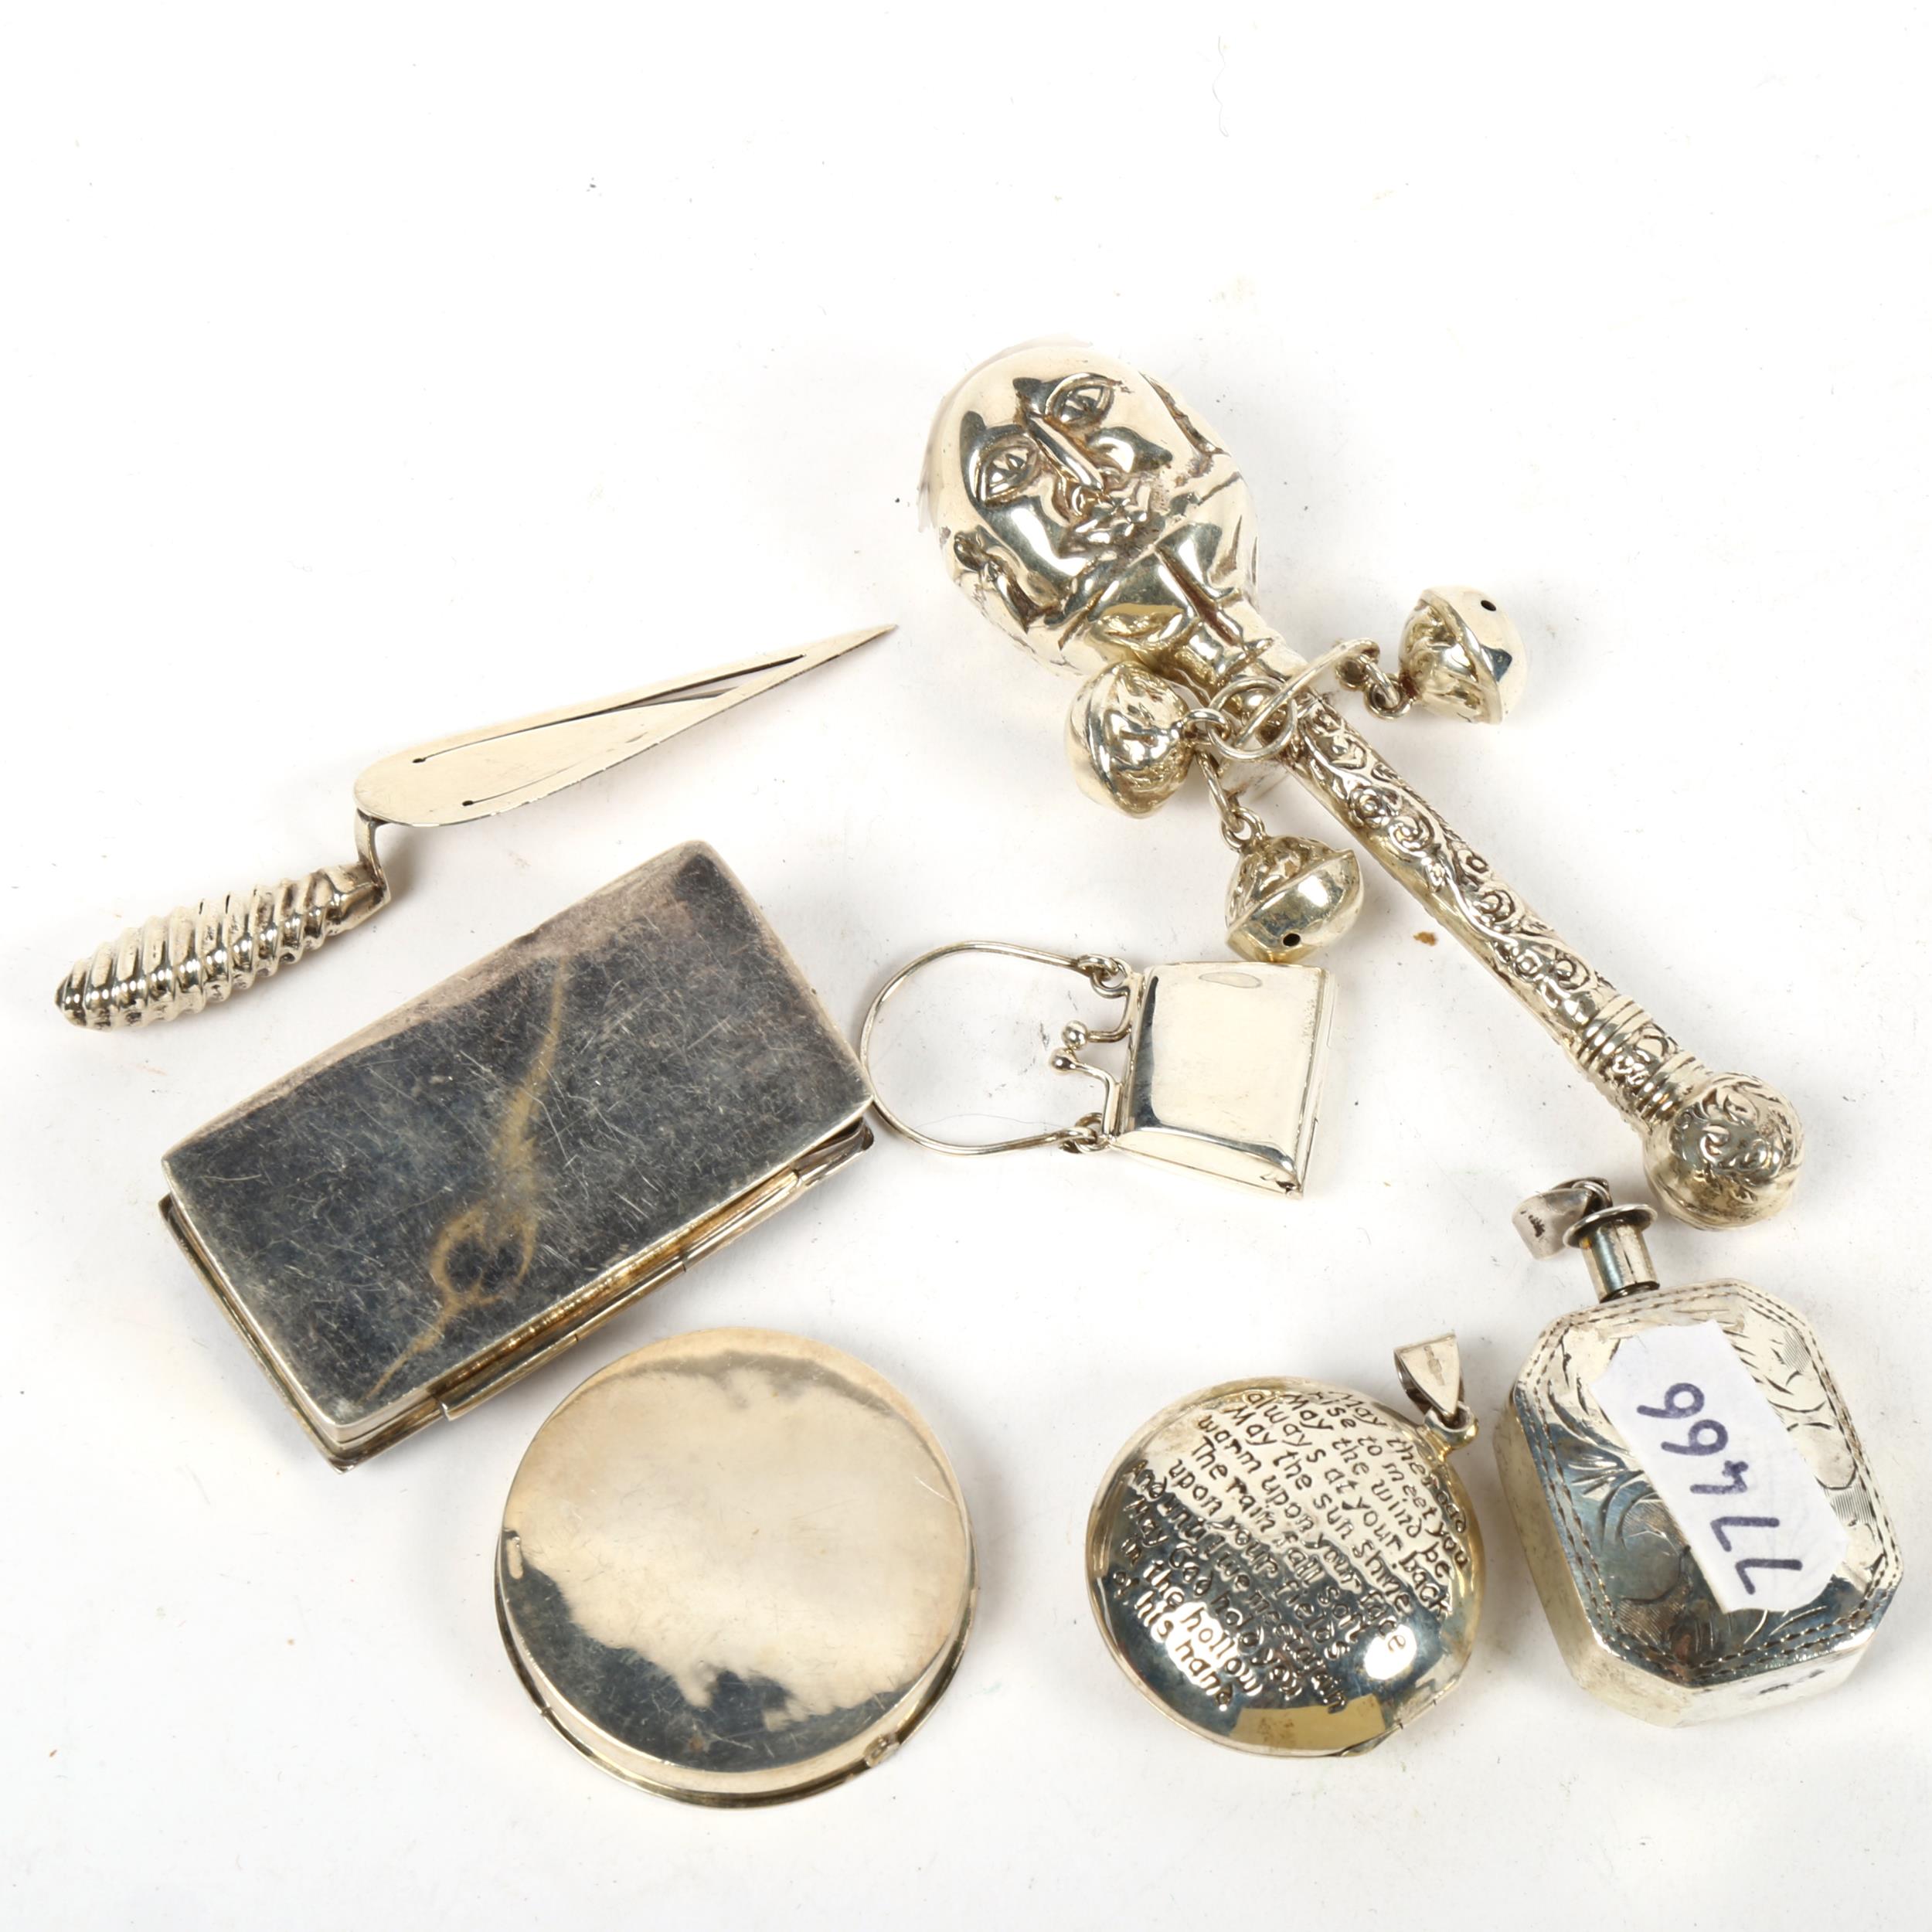 A collection of modern 925 silver pillboxes, baby's rattle, trowel bookmark etc (7) - Image 2 of 2